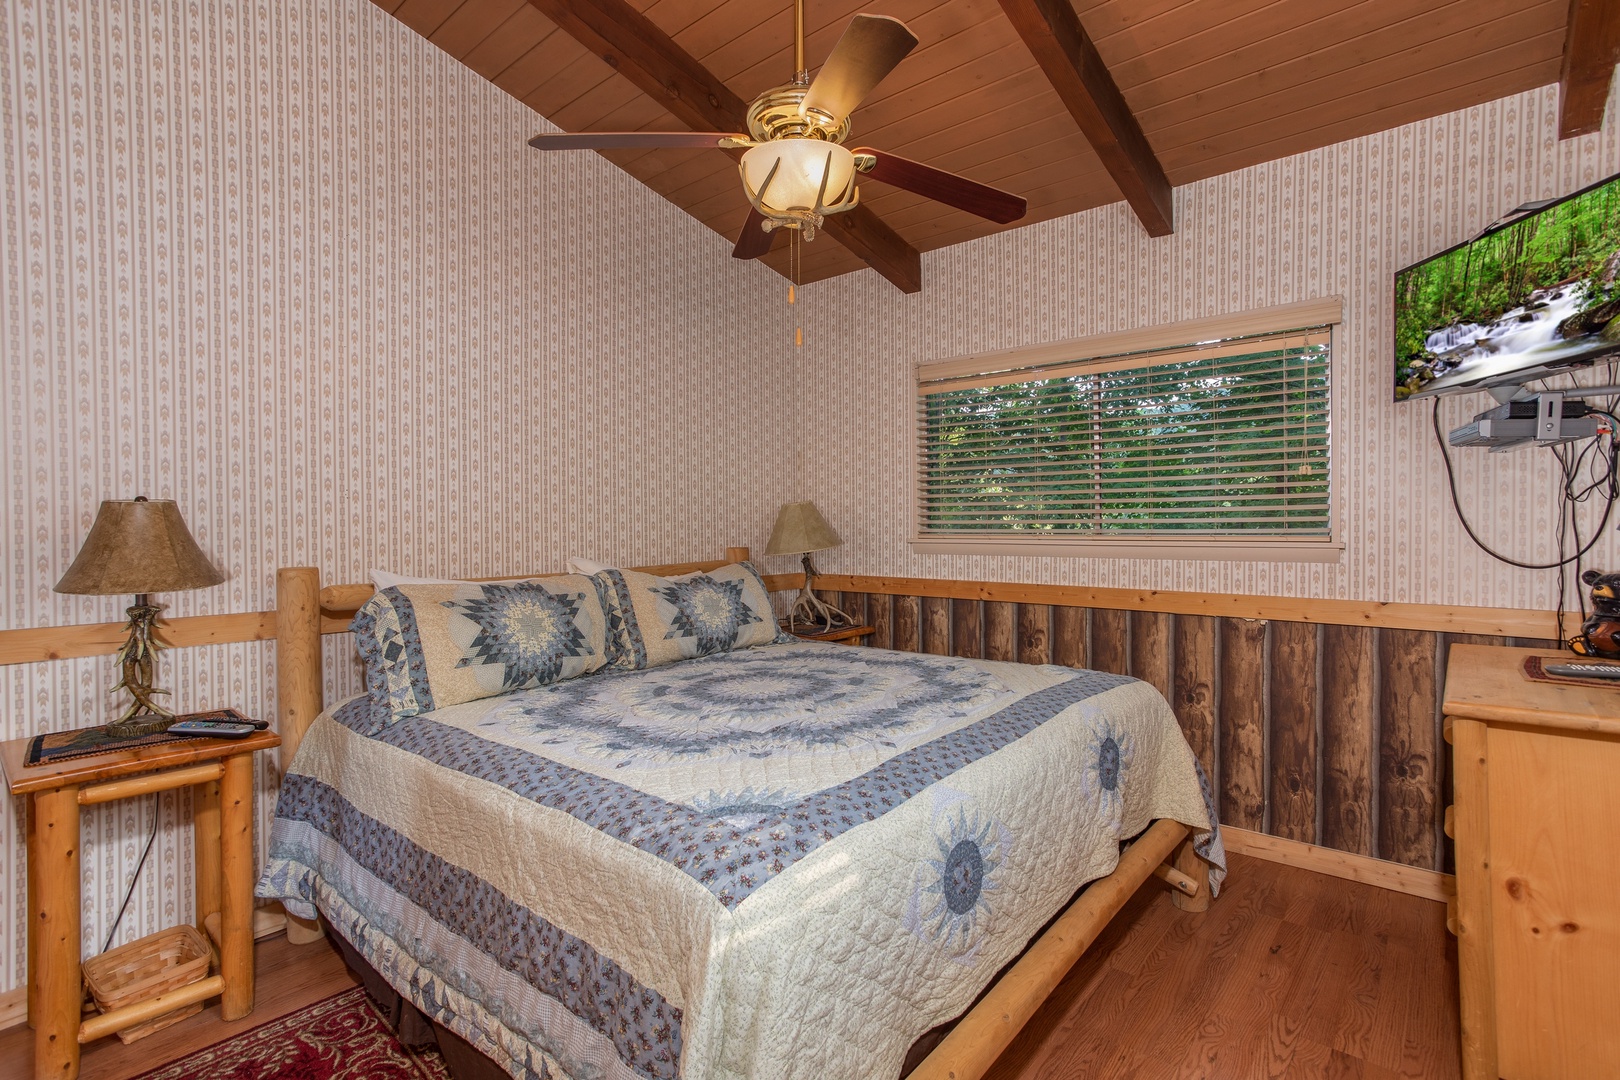 King-sized log bed in a bedroom with a TV and dresser at Bushwood Lodge, a 3-bedroom cabin rental located in Gatlinburg